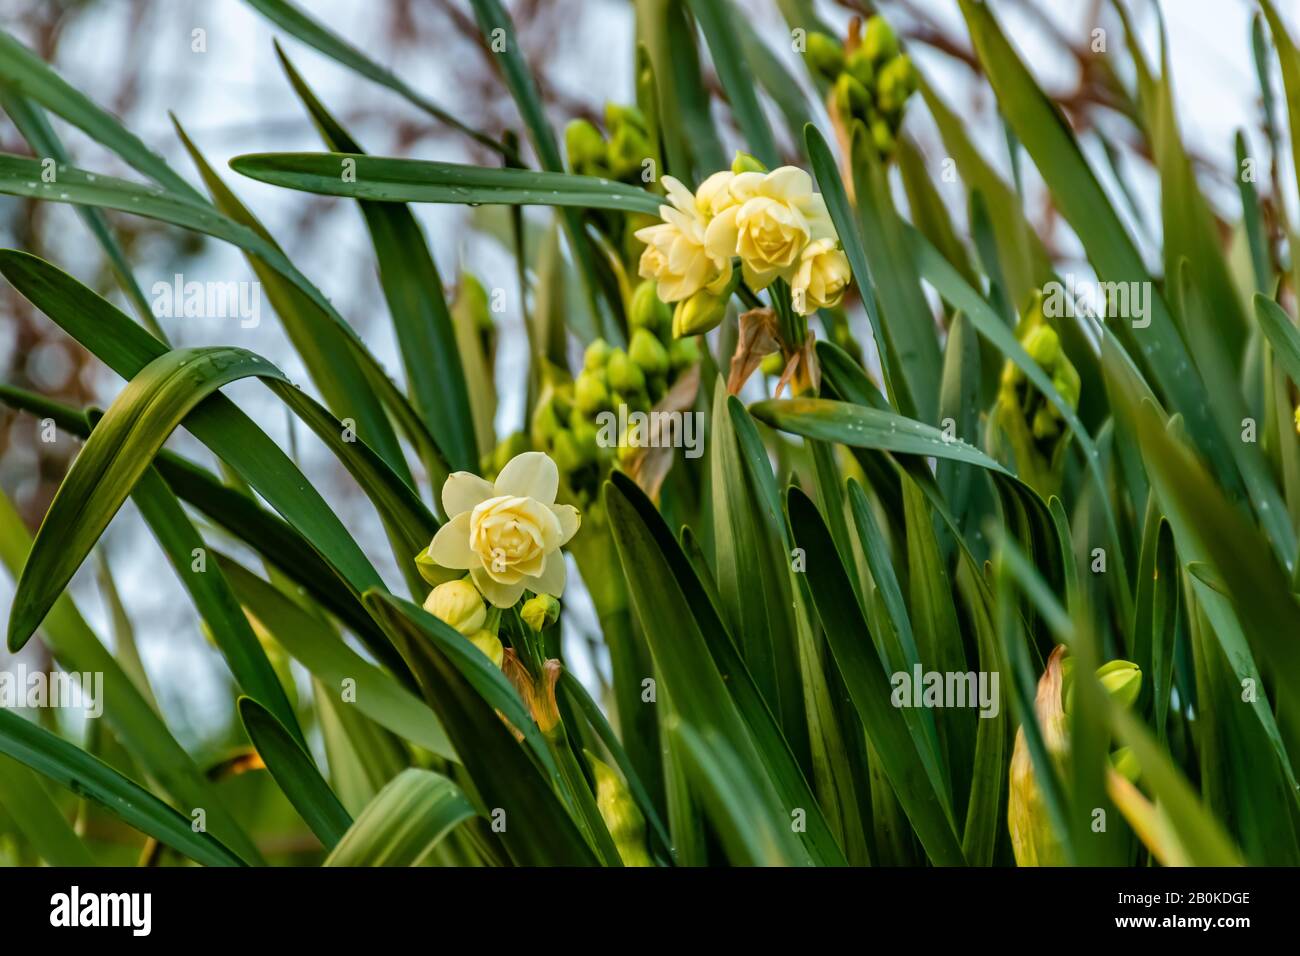 Several pale yellow (beige) narcissus flowers with long green leaves blooming in a park Stock Photo